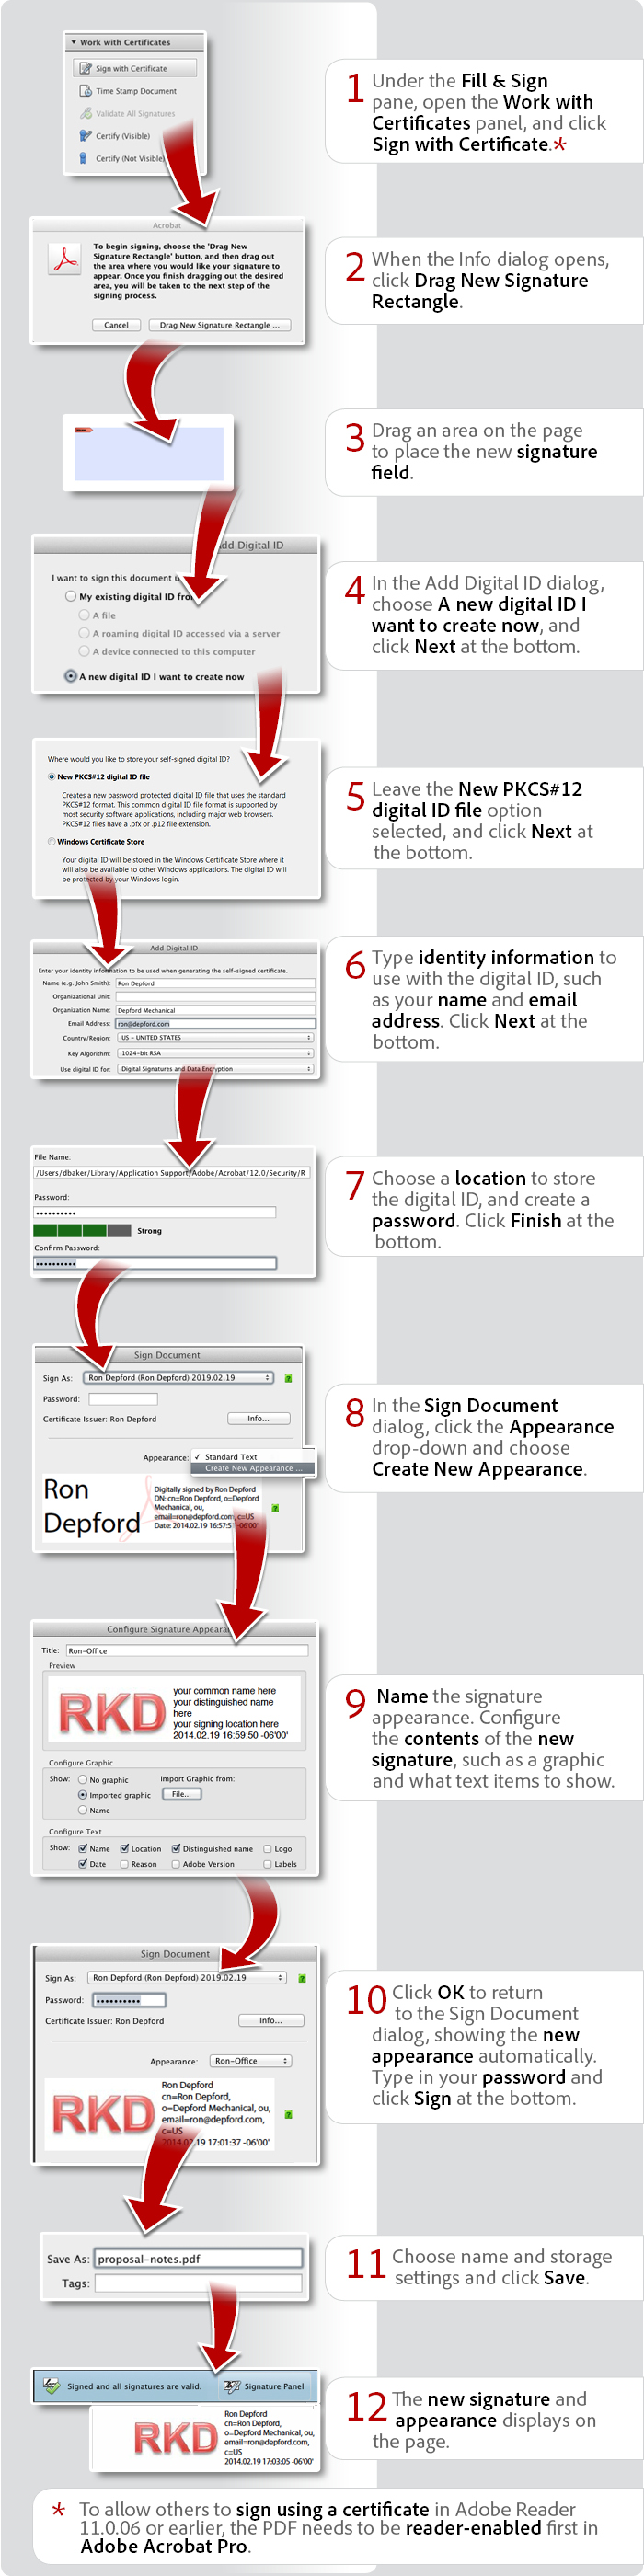 How to sign using a certificate in Acrobat XI and Reader